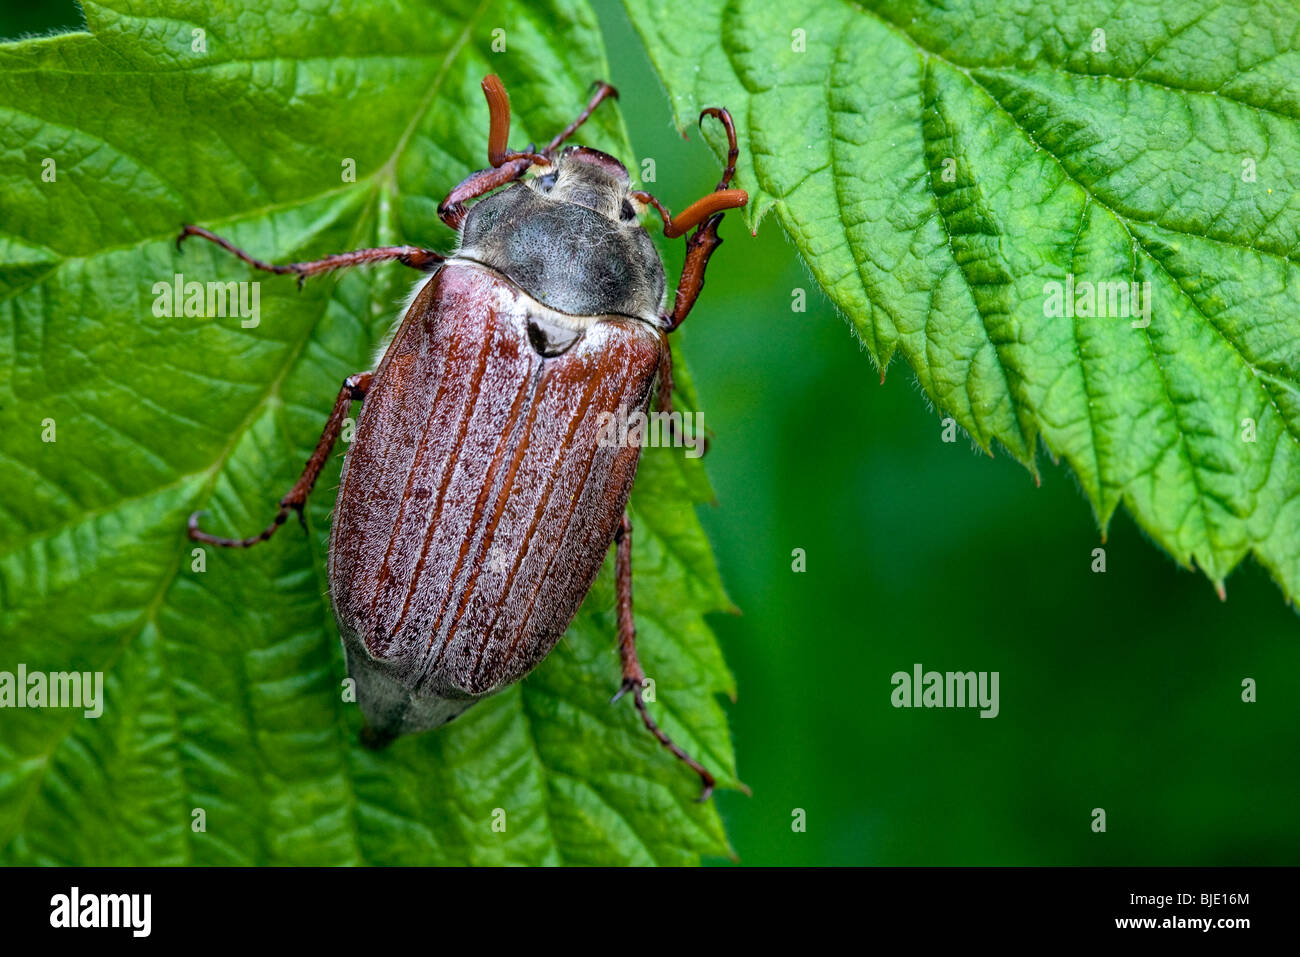 Common cockchafer (Melolontha melolontha) on leaf, Belgium, Europe Stock Photo